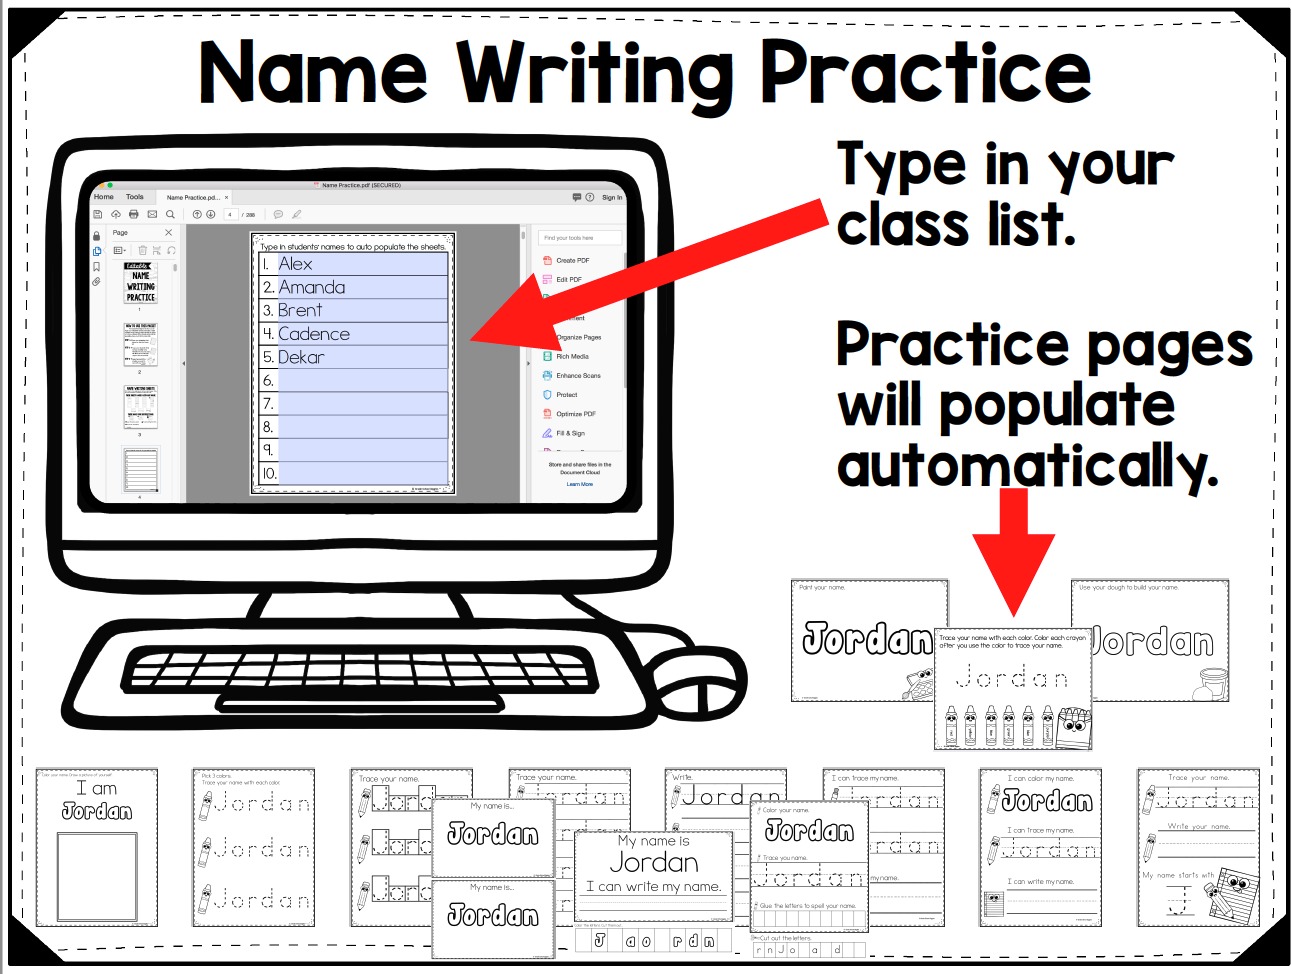 Name writing practice is important for kids in kindergarten. Creating handwriting worksheets for each student in their classroom is a lot of work for teachers. This editable pack of printable sheets makes it easy. Simply enter your classroom roster & 14 different practice pages will automatically populate for all the children in your class. Kids will love the fun activities including tracing, writing, painting with watercolors, and other awesome fine motor activities. #NameWriting #Kindergarten